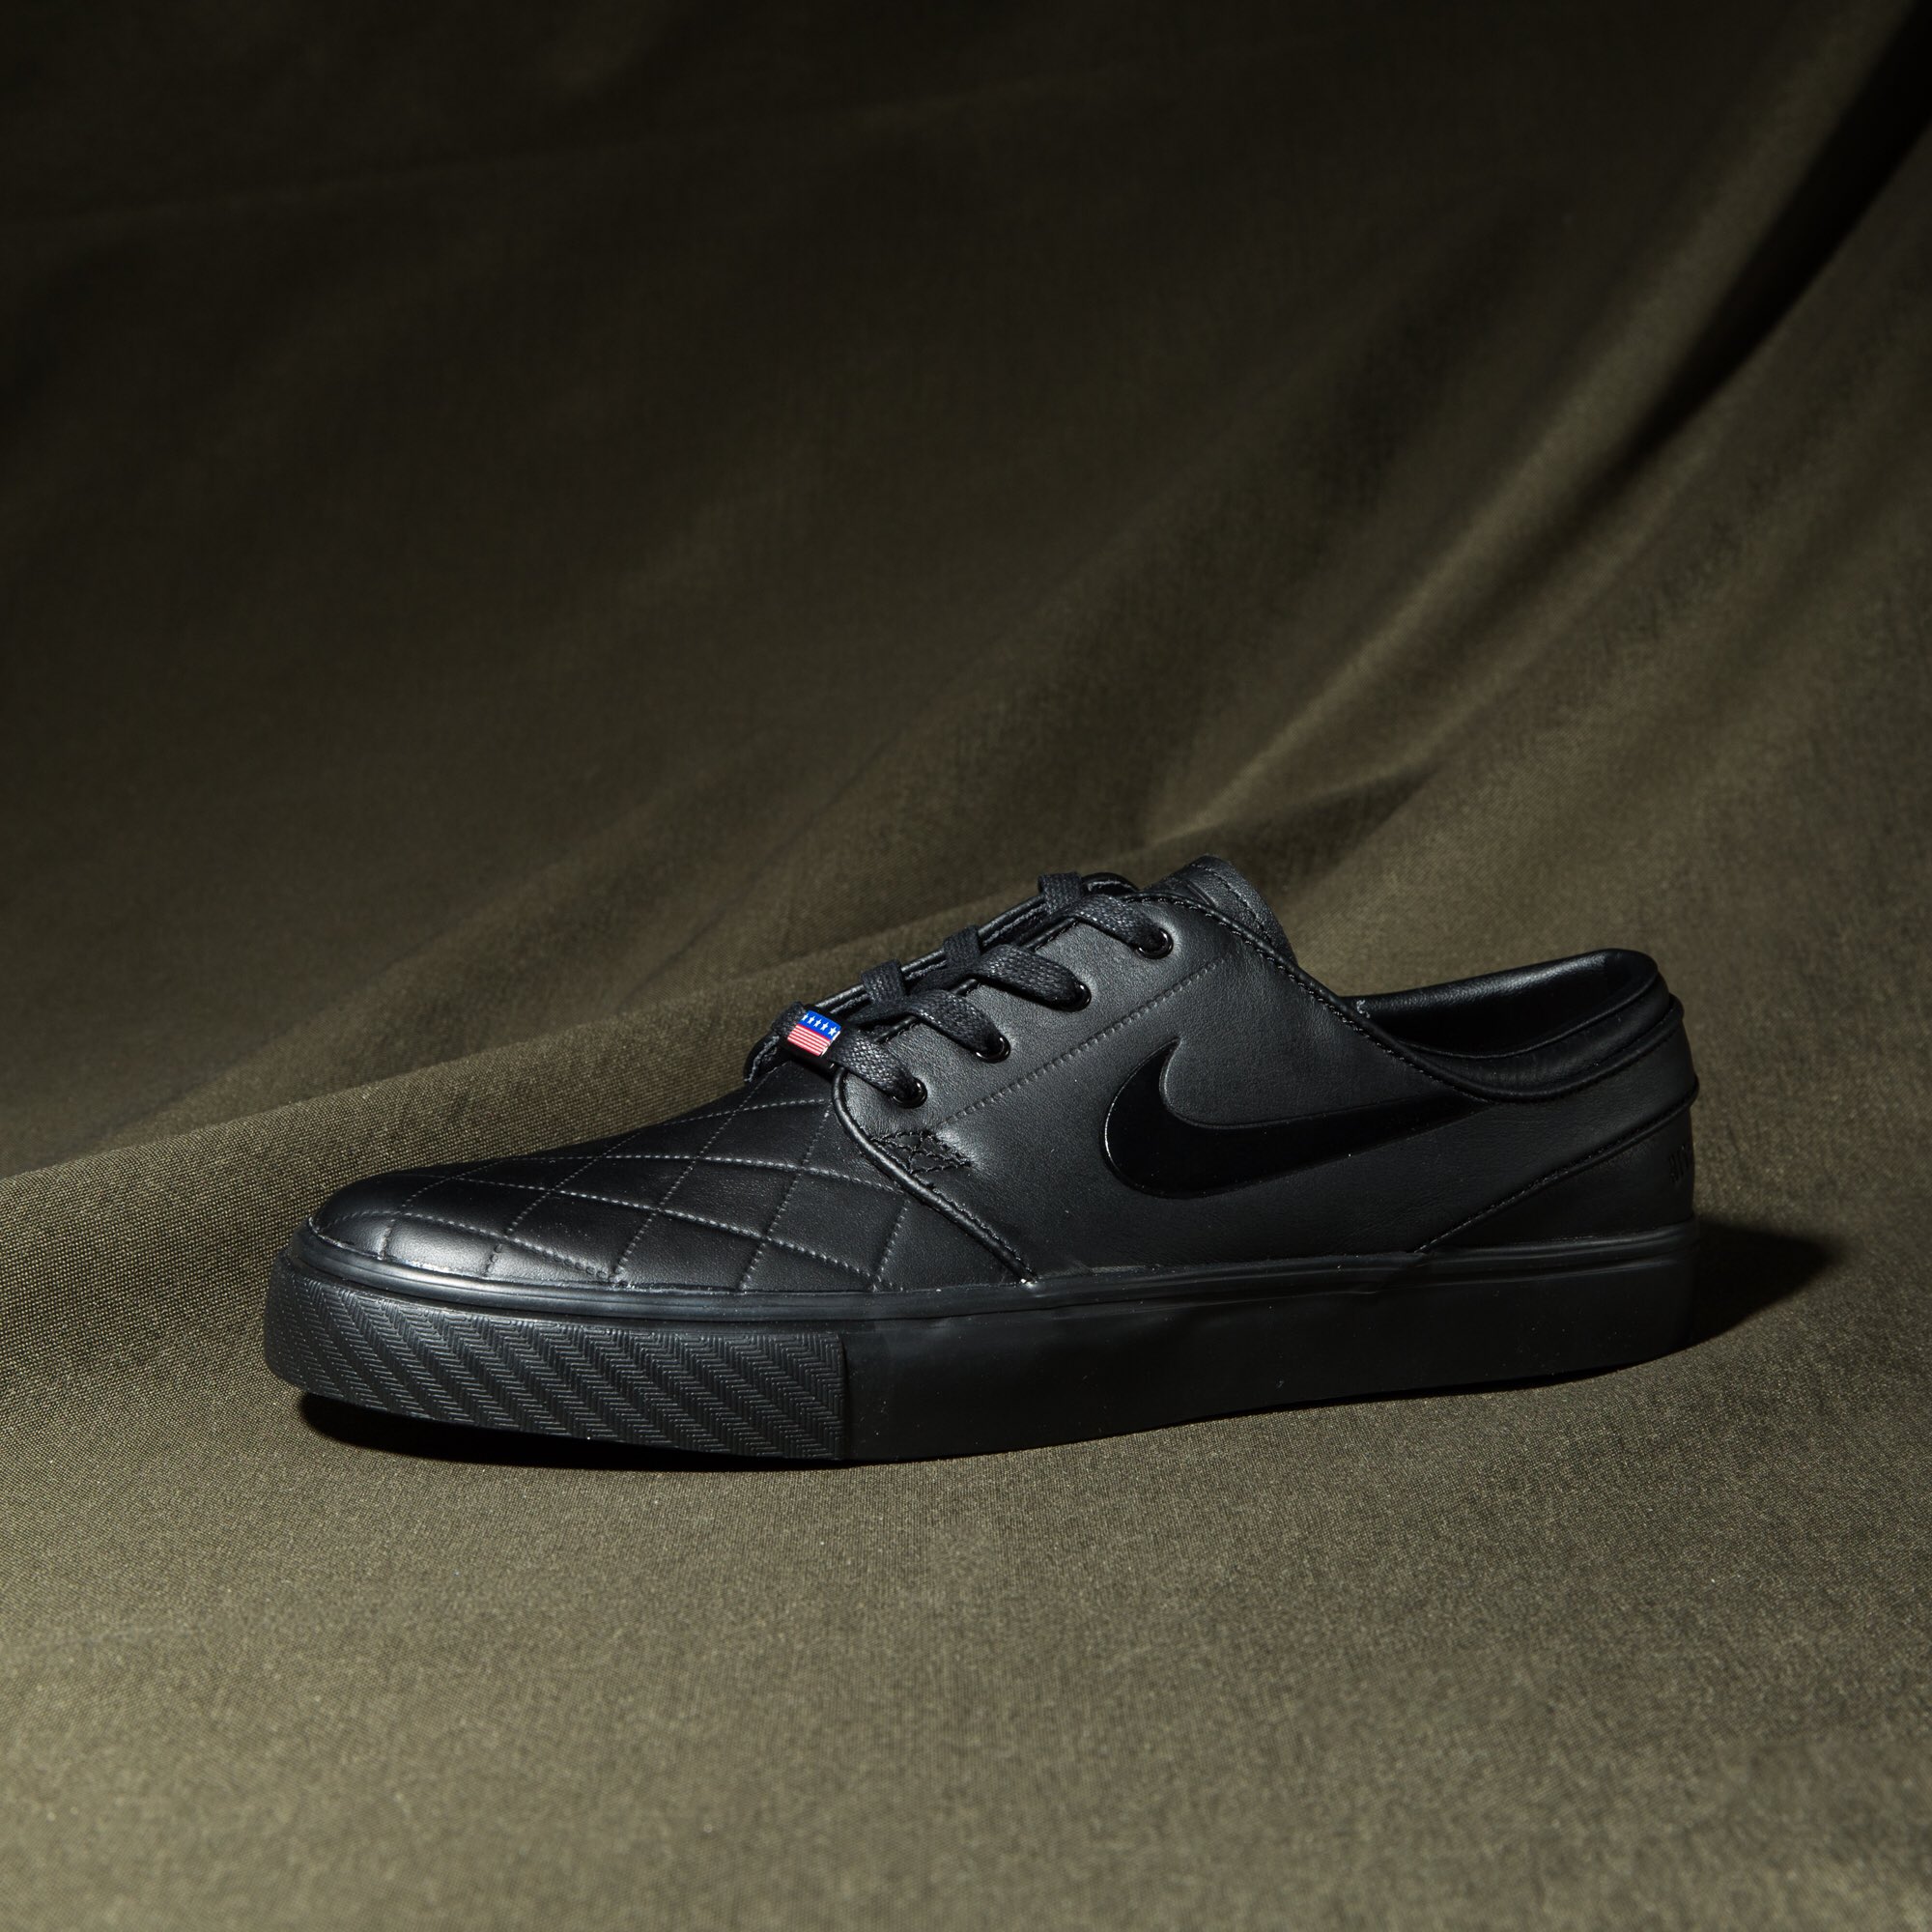 Obediencia Buscar envidia توییتر \ UNDEFEATED در توییتر: «Nike SB Zoom Stefan Janoski Elite SB x FB  // Available Sunday 5/1 at La Brea, Silverlake and https://t.co/rPhV7ZP2Fc  https://t.co/IEcnBd69by»